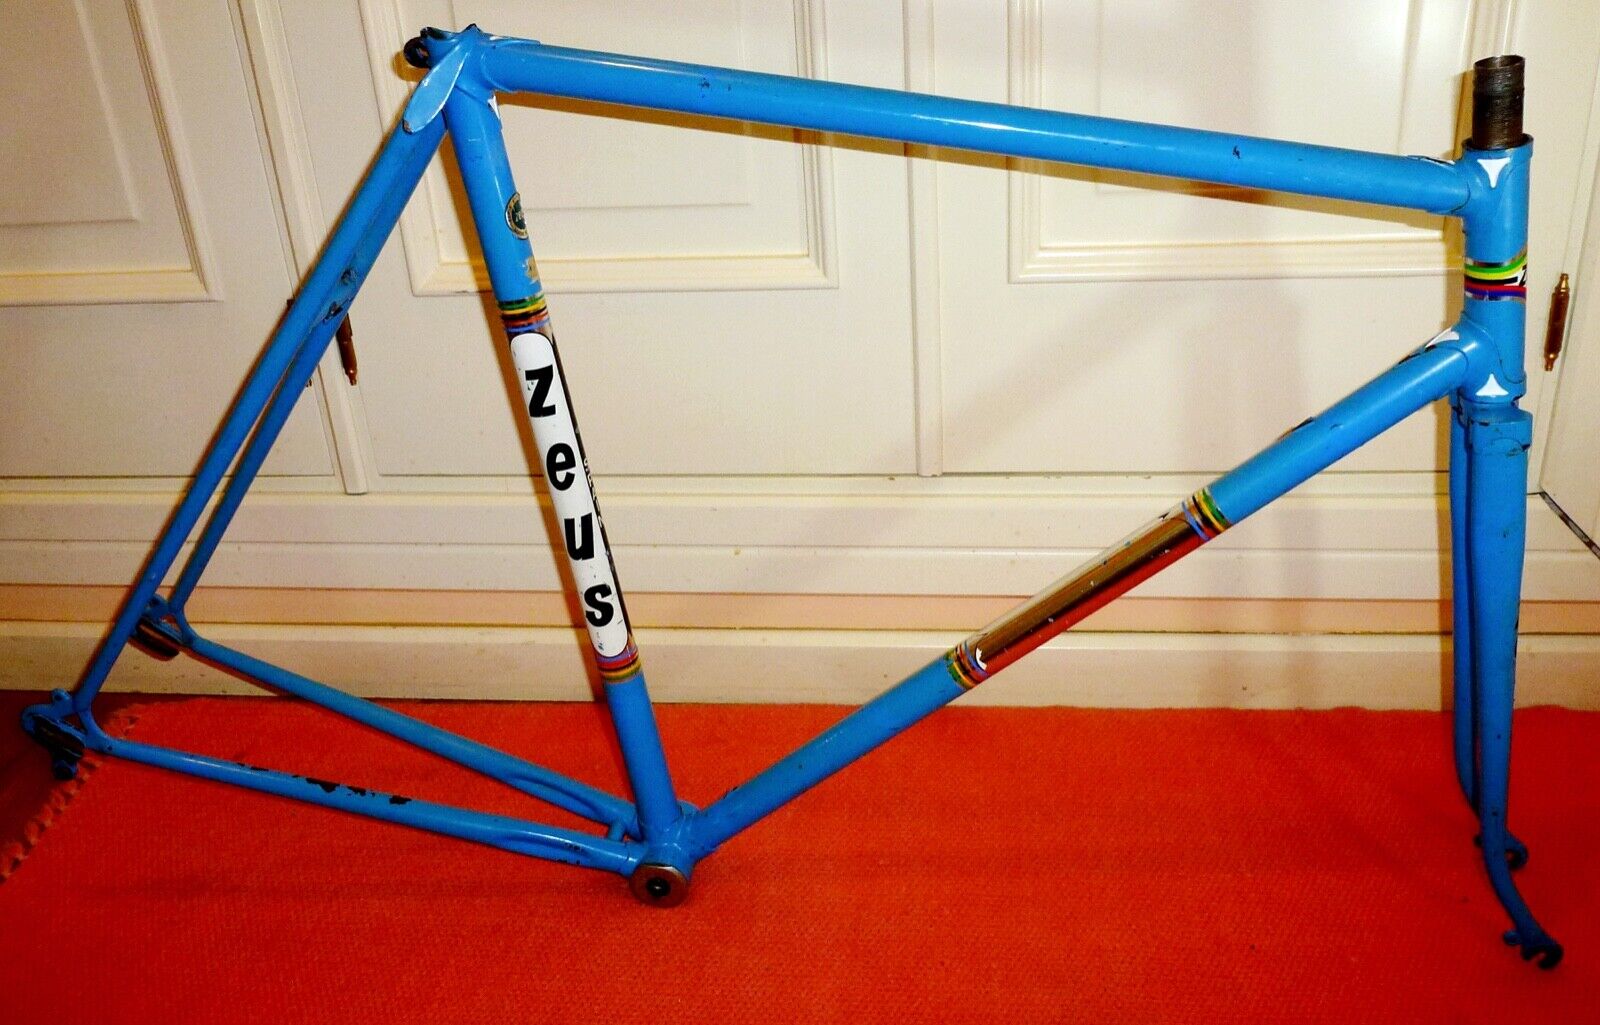 Zeus bicycle bike frameset frame and fork - From the 70s -...